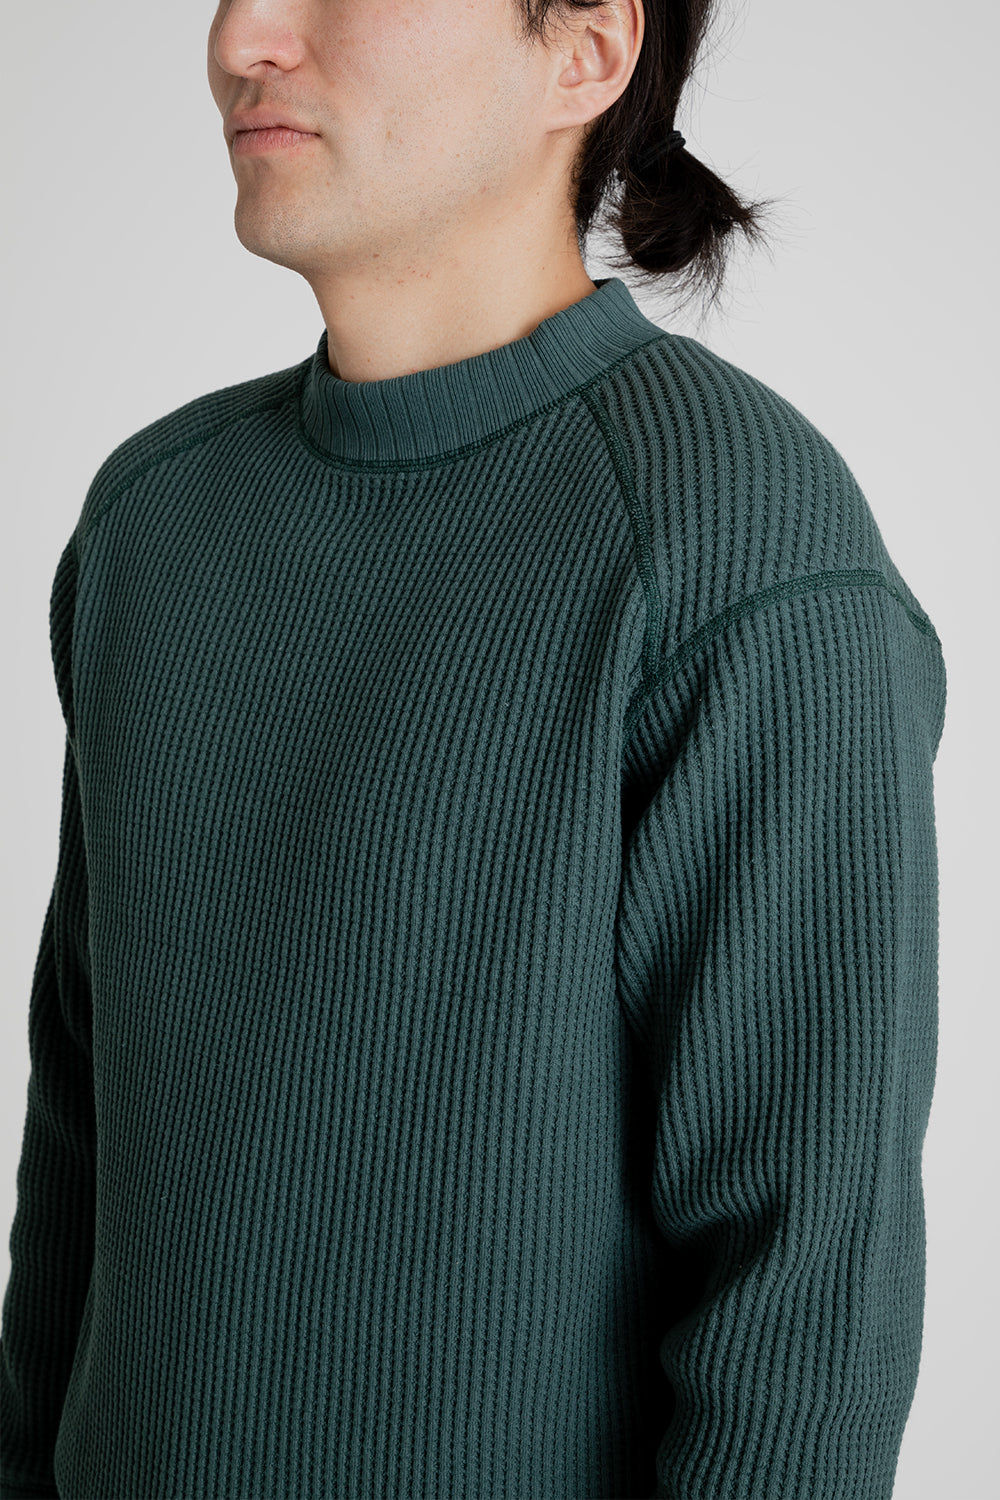 Jackman Waffle Midneck in Ivy